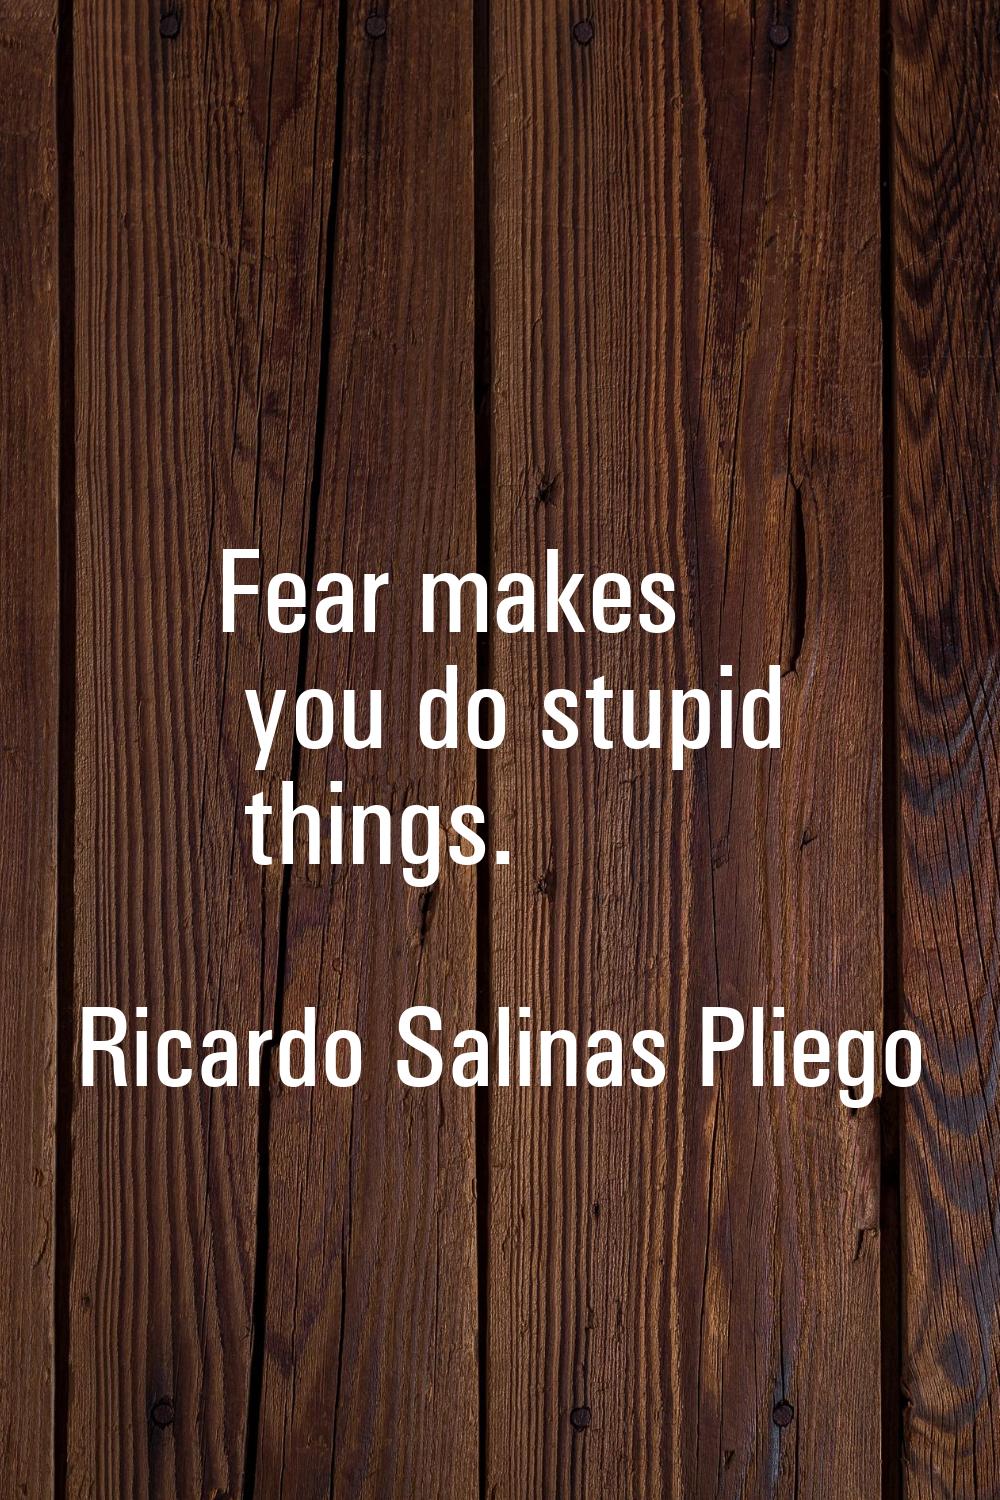 Fear makes you do stupid things.